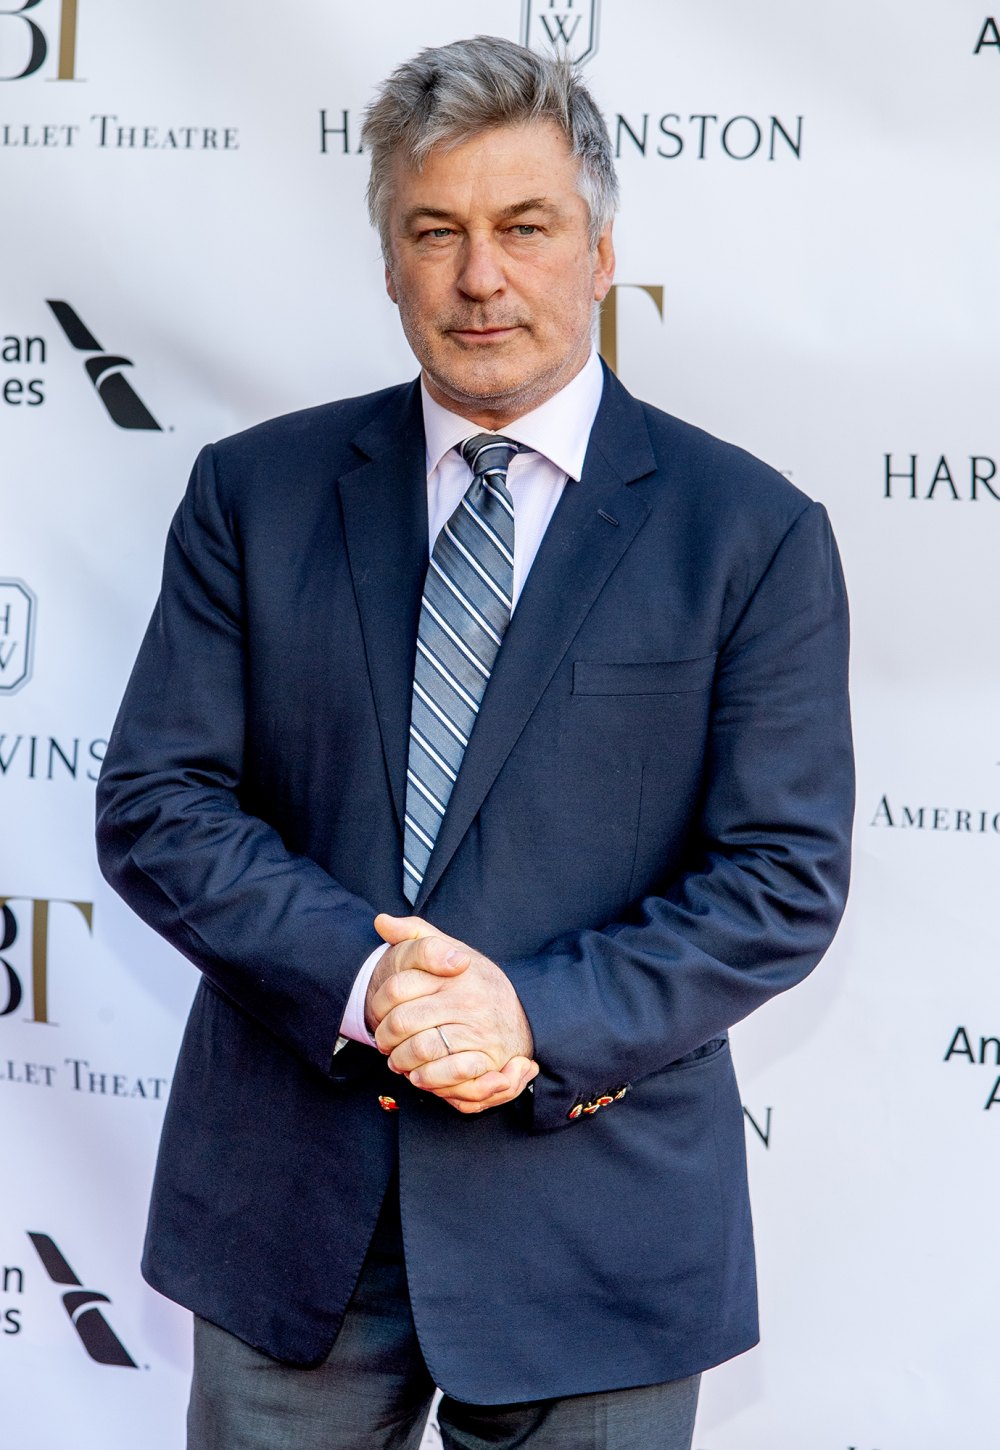 Alec Baldwin Requests Speedy Trial After Being Indicted Again on New 'Rust' Shooting Charges